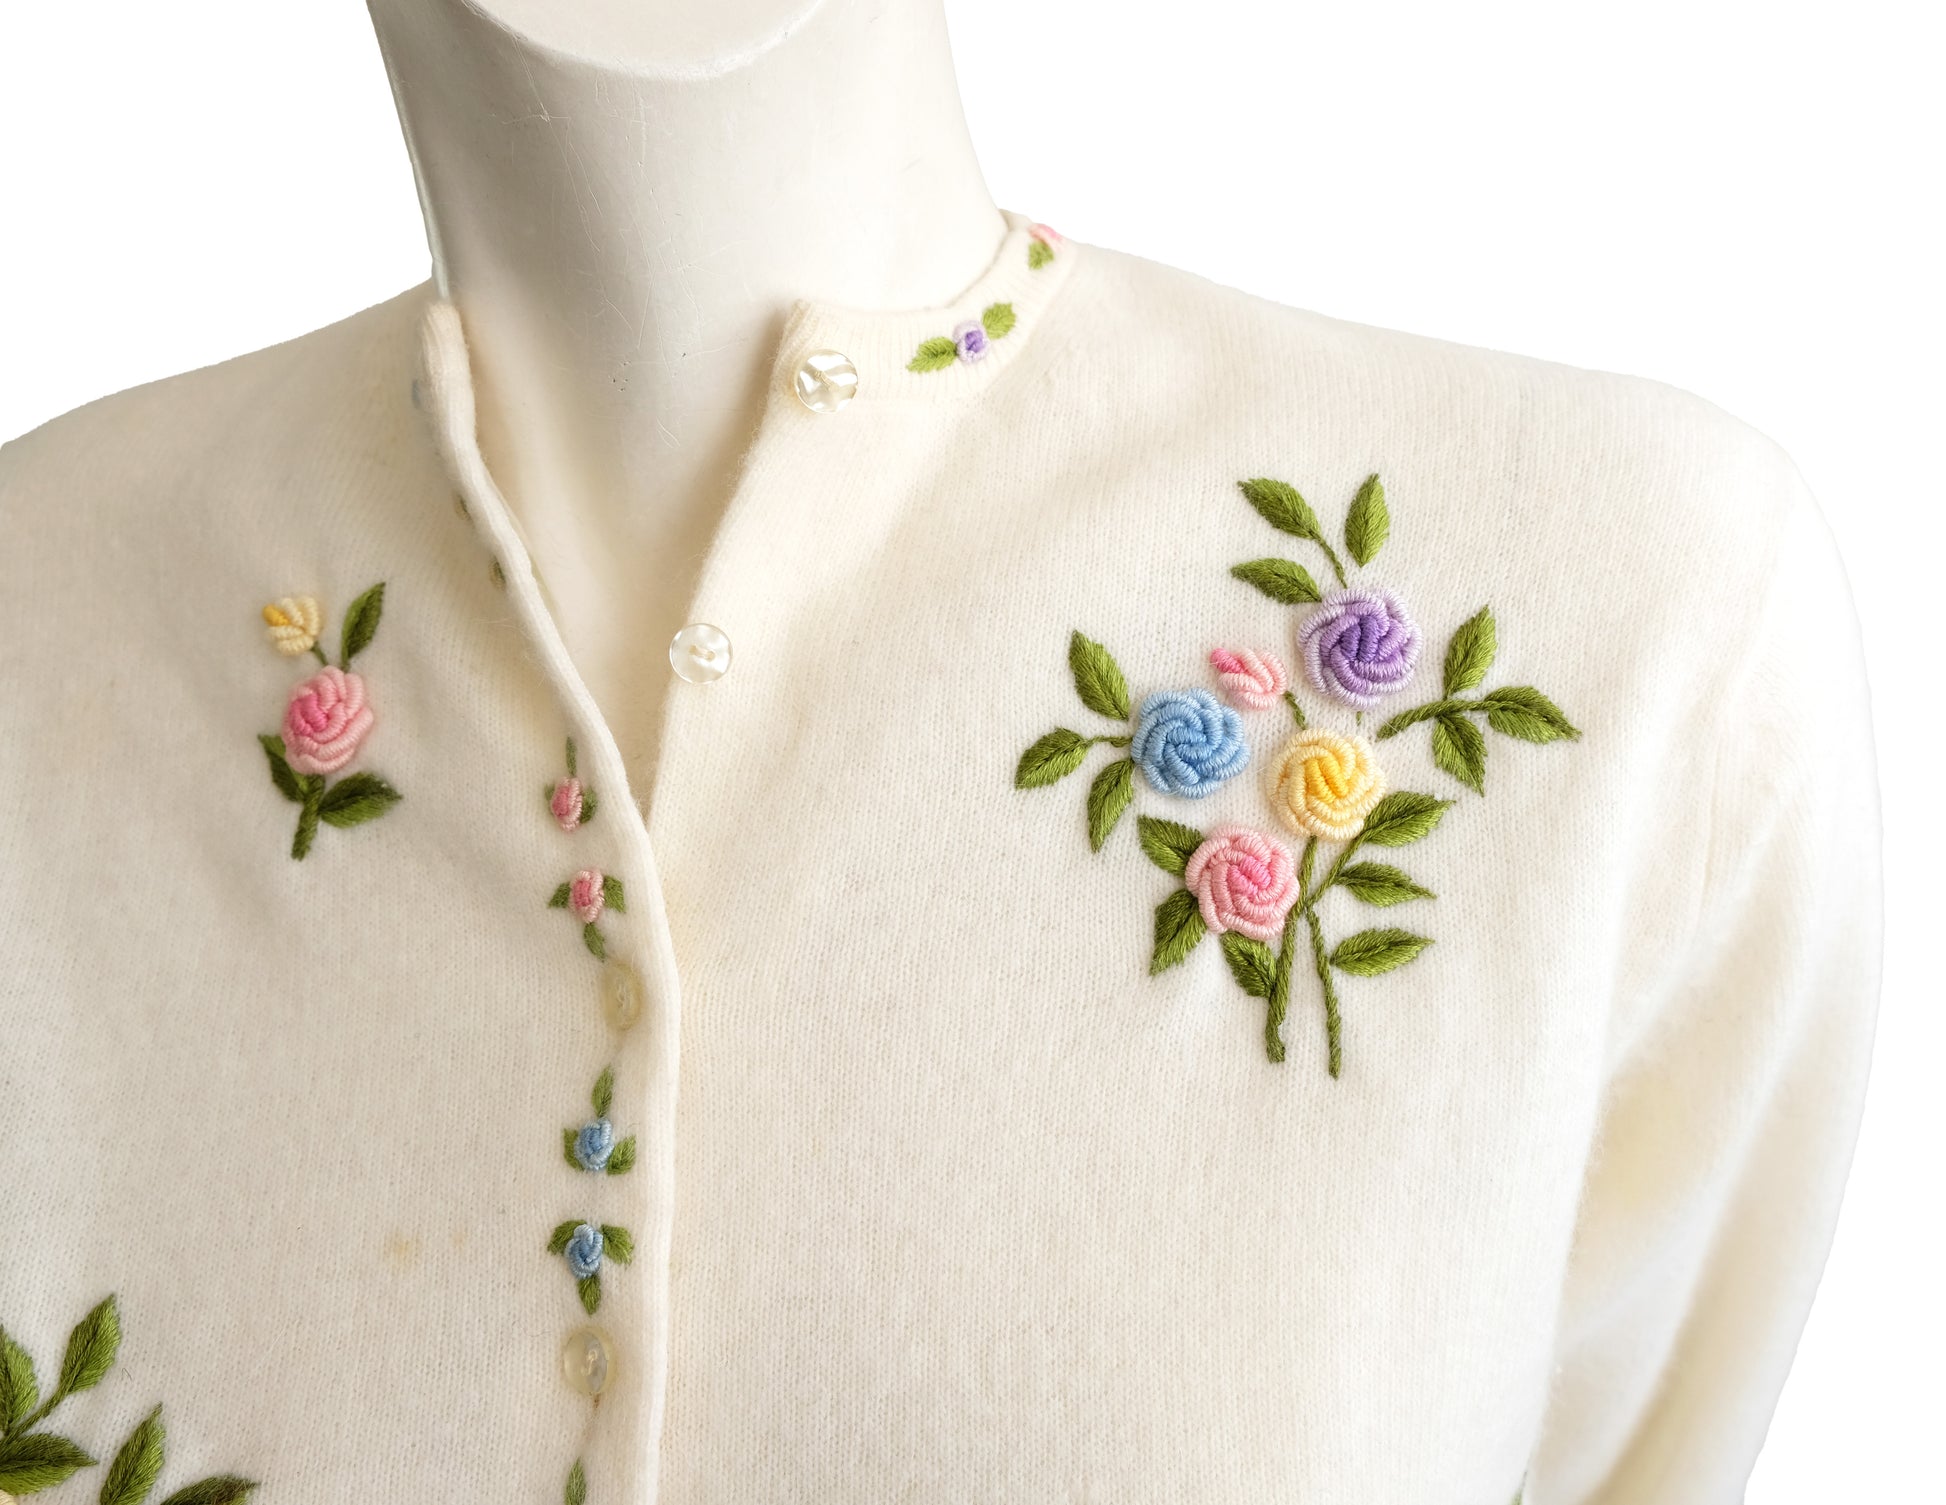 1960s Vintage Embroidered Rosebud Cardigan in White Wool, S